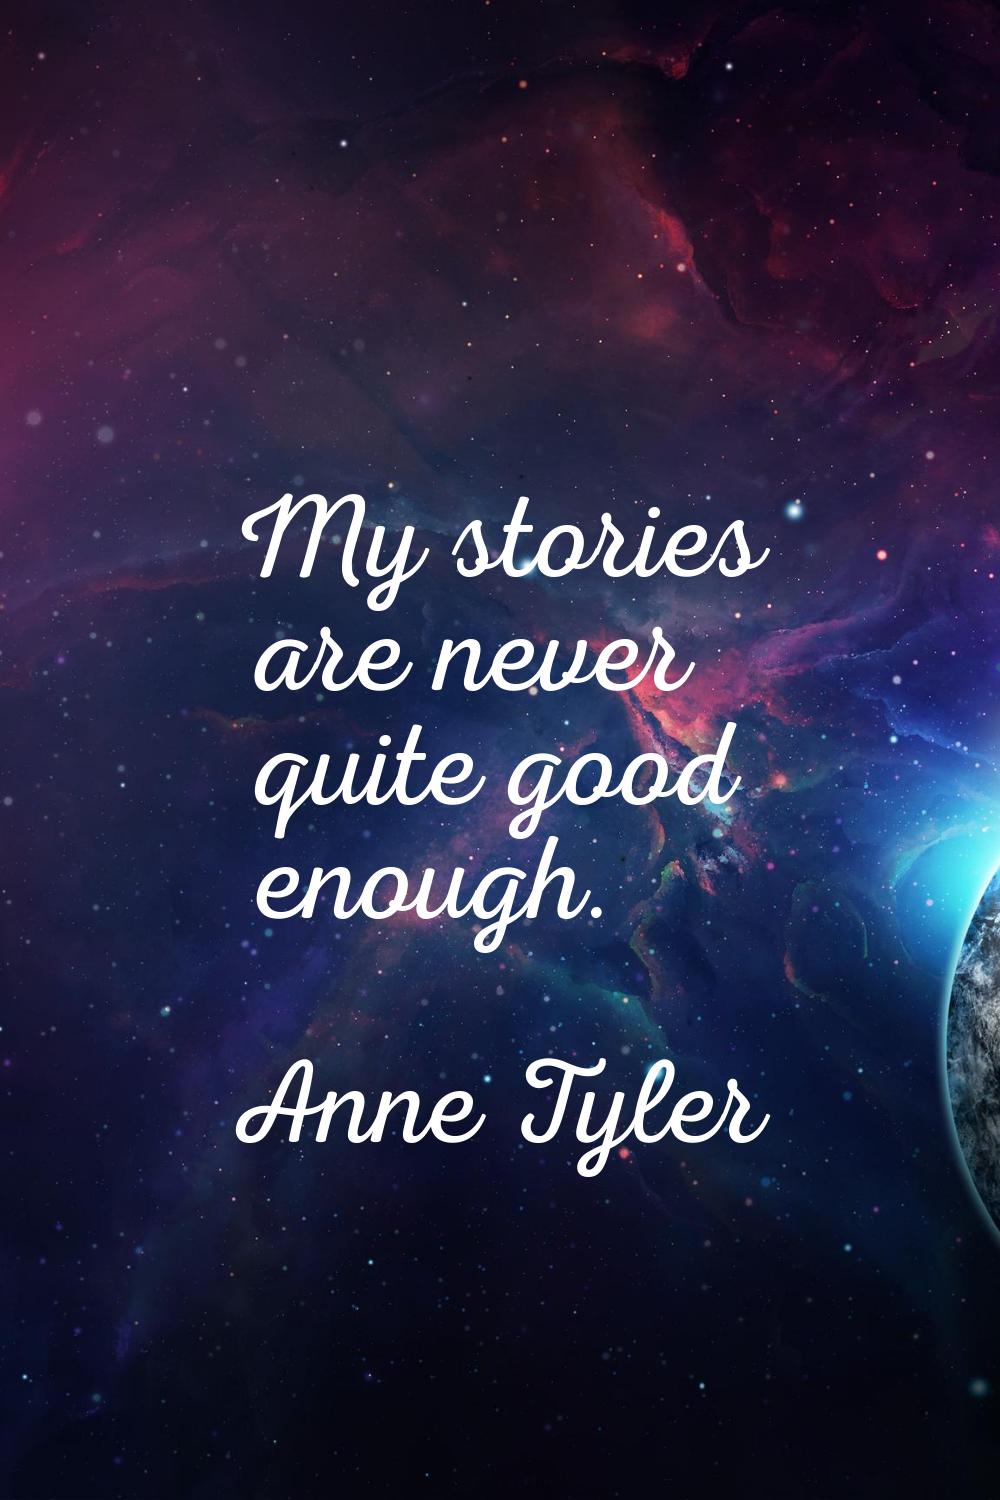 My stories are never quite good enough.